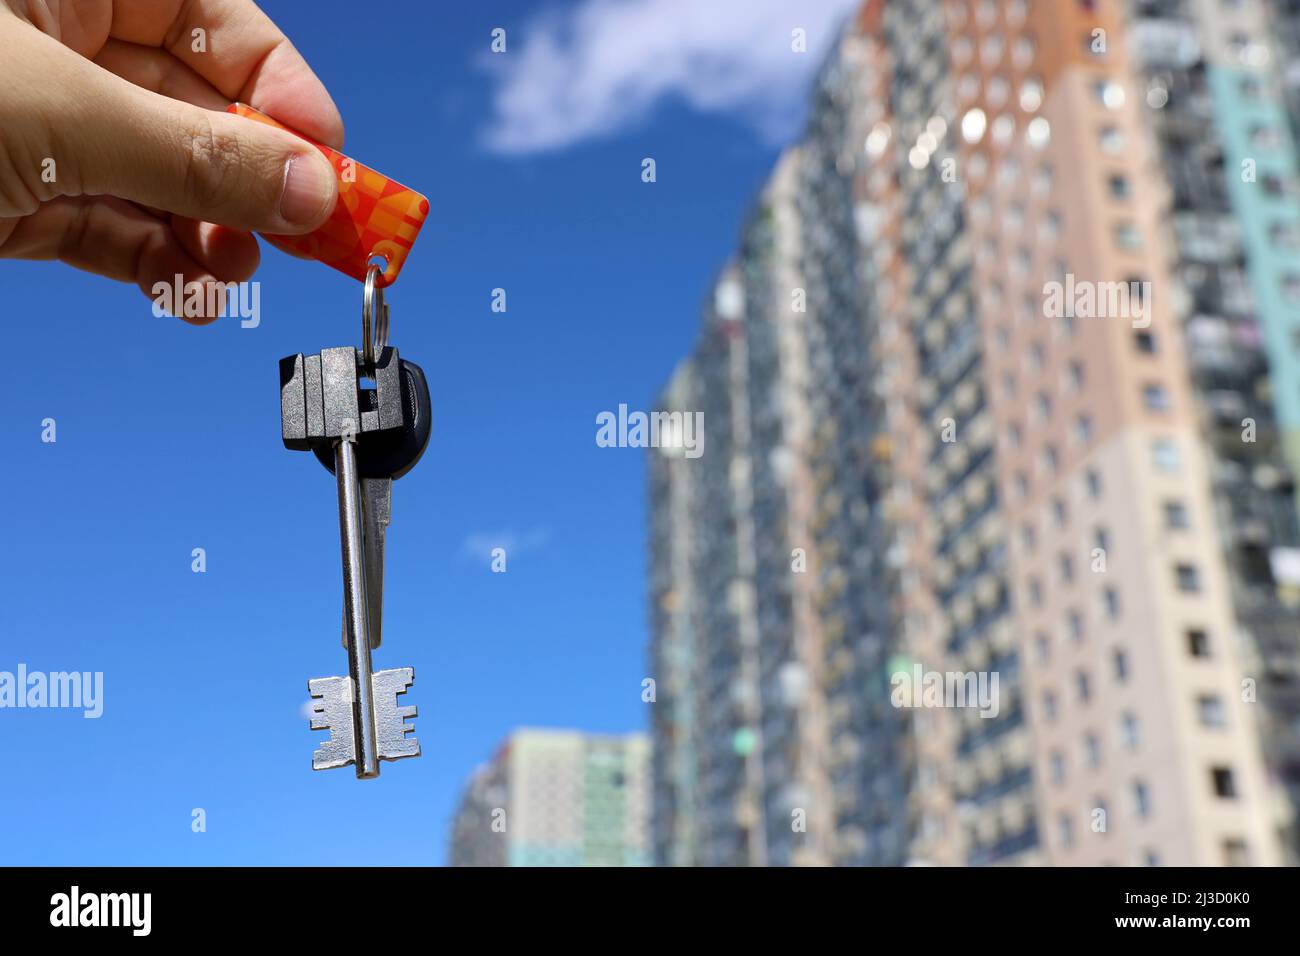 House keys in male hand on background of new buildings. Real estate agent, moving home or renting property Stock Photo